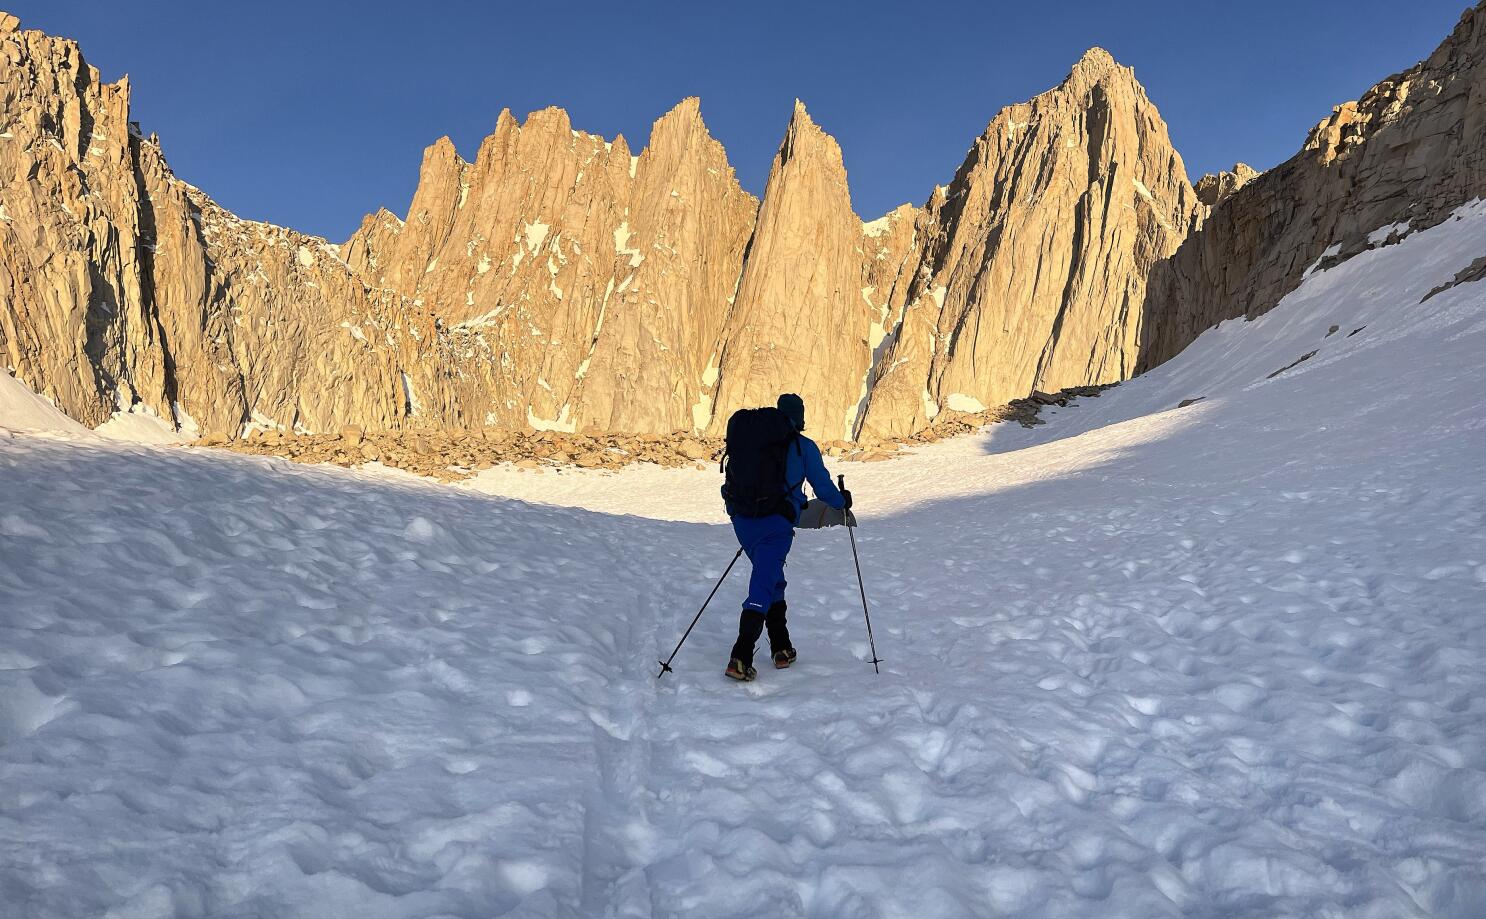 Mt. Whitney: A perilous trek to the top of California's record